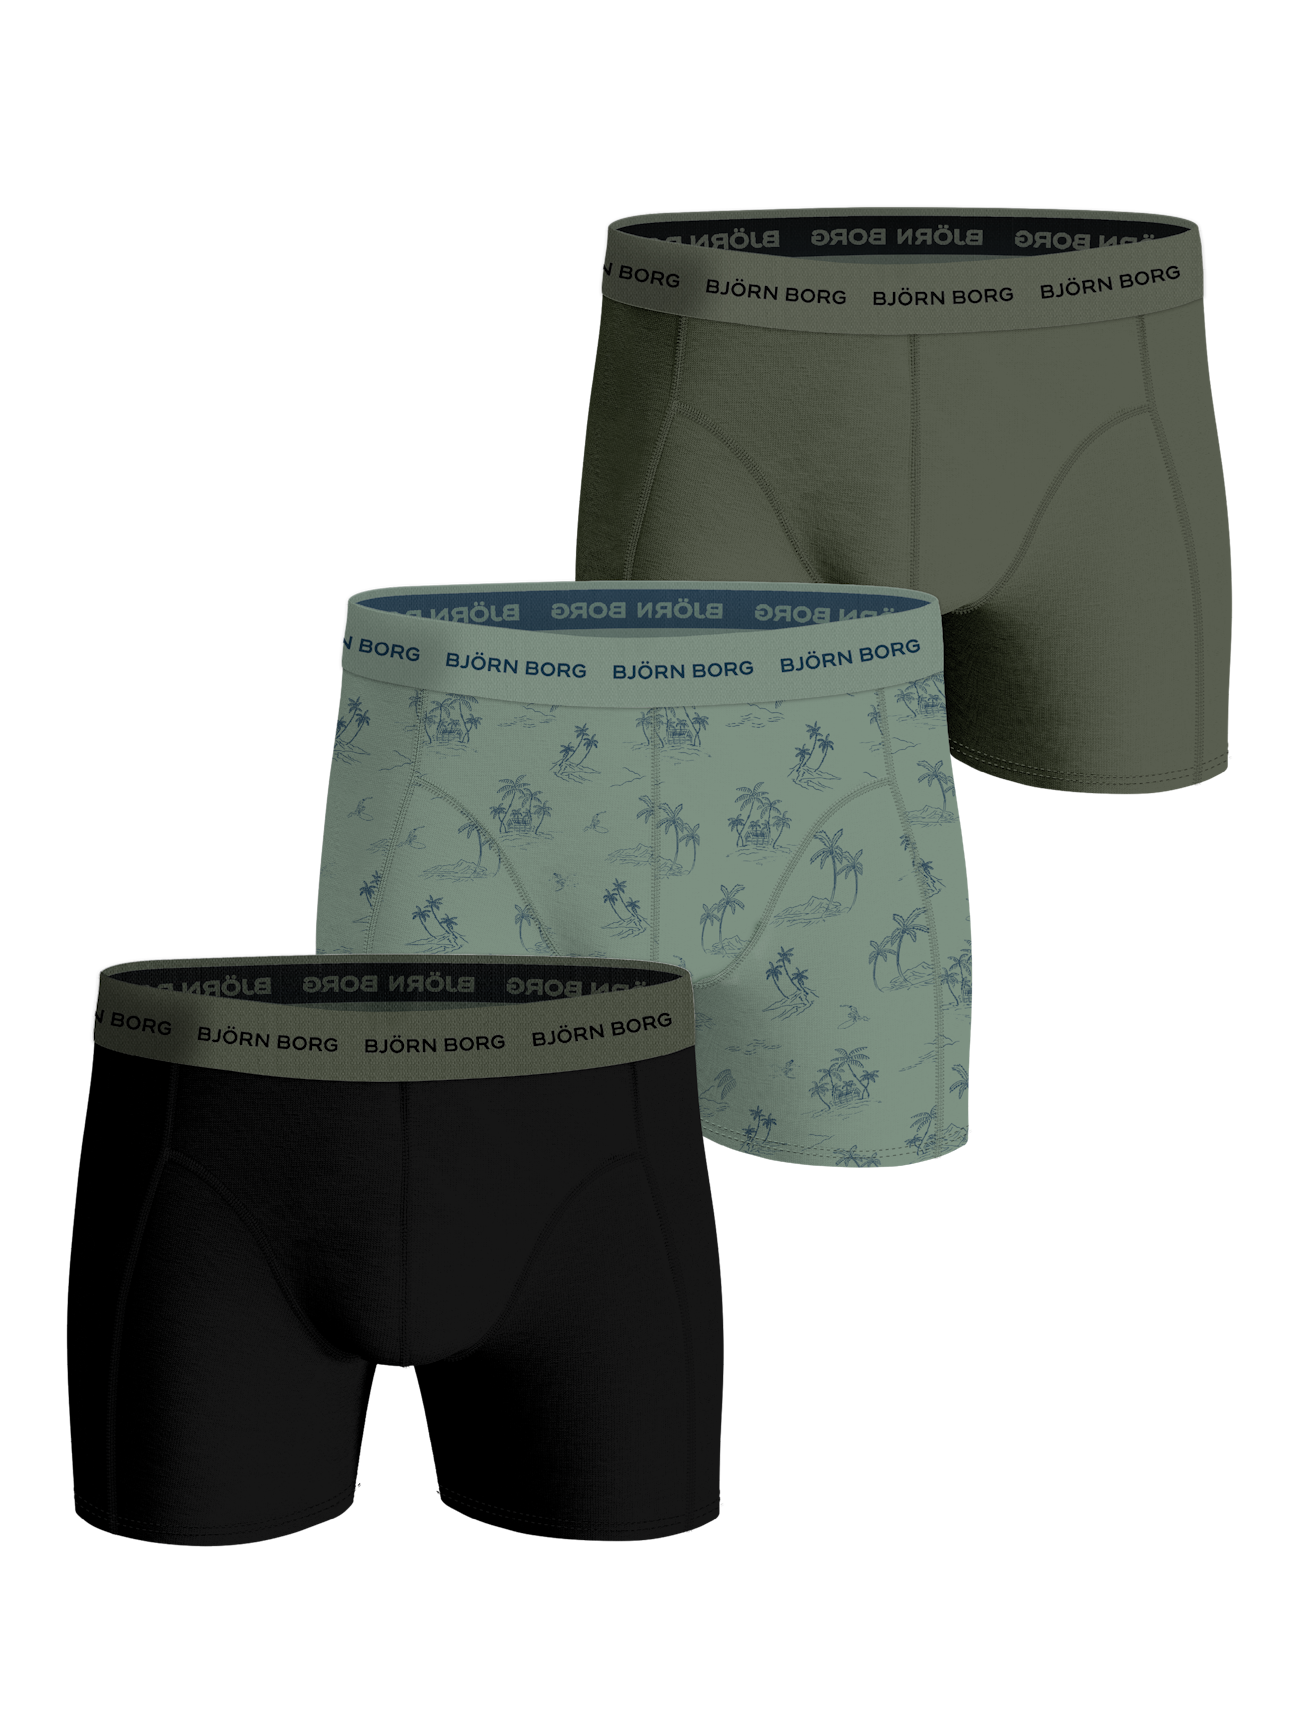 NEXT MENS 100% COTTON Loose Fit Boxers Underwear Pants Trunks 3 Pack £15.95  ONLY